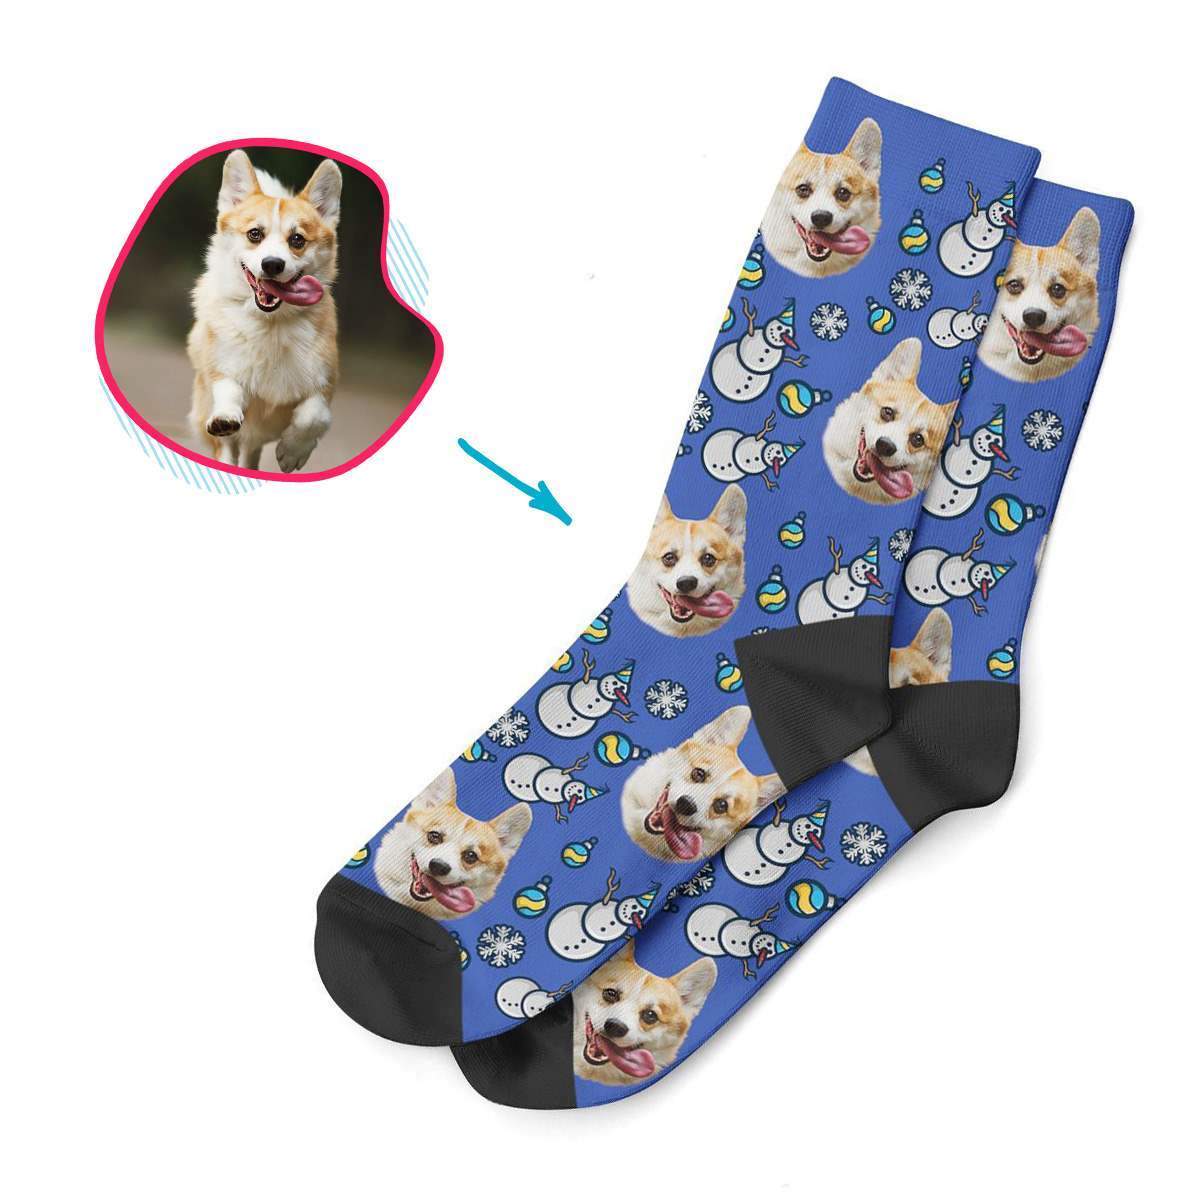 darkblue Snowman socks personalized with photo of face printed on them